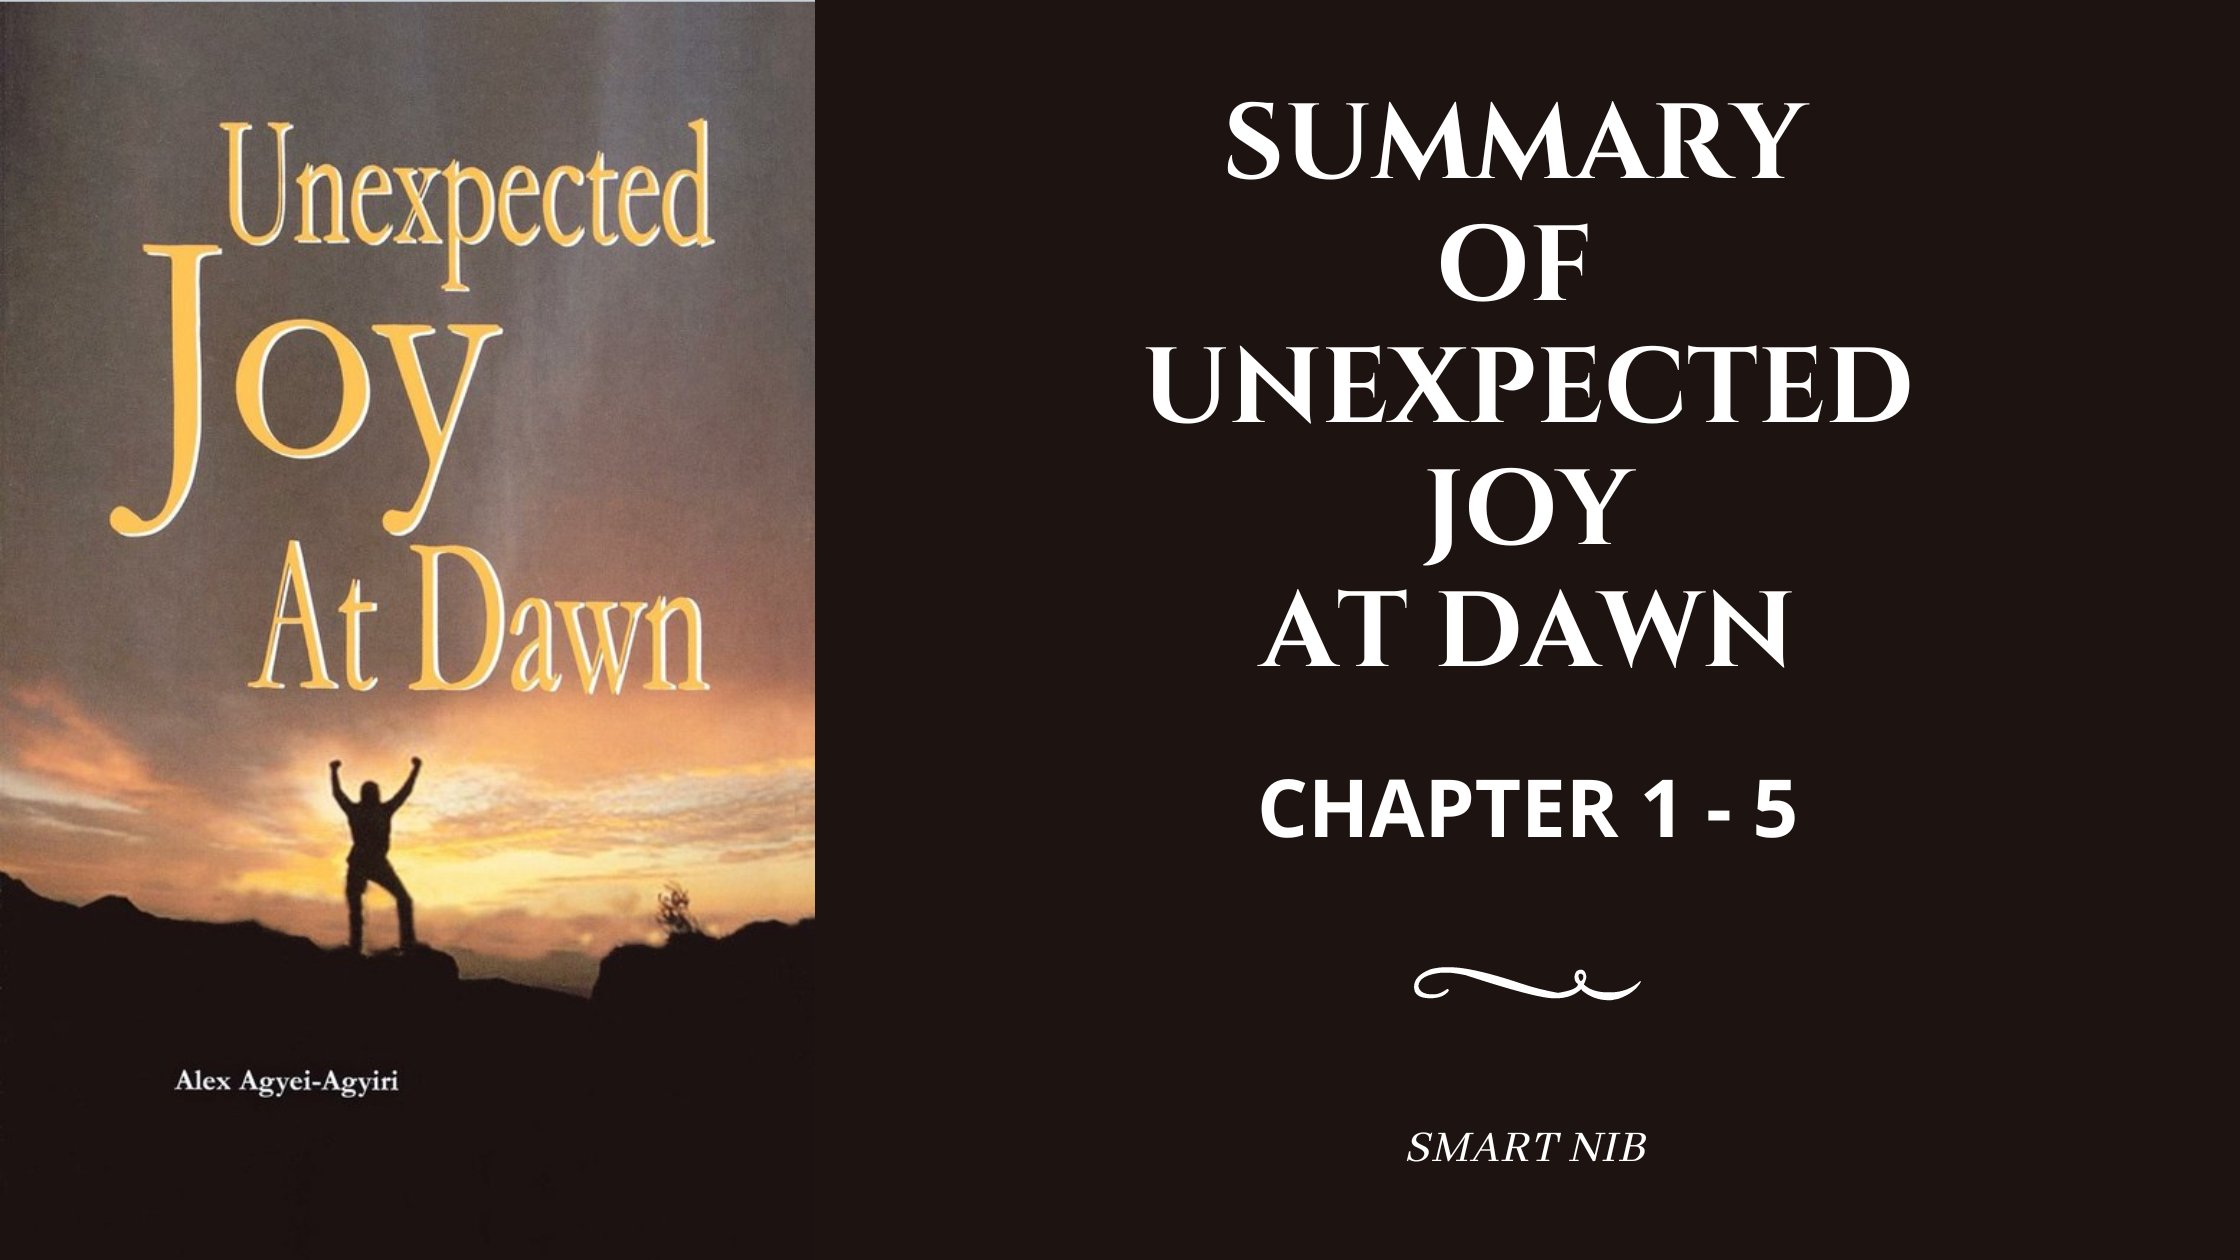 Summary of UNEXPECTED JOY AT DAWN By Alex Agyei Agyiri's: Part 1(Chapter 1 to Chapter 5)